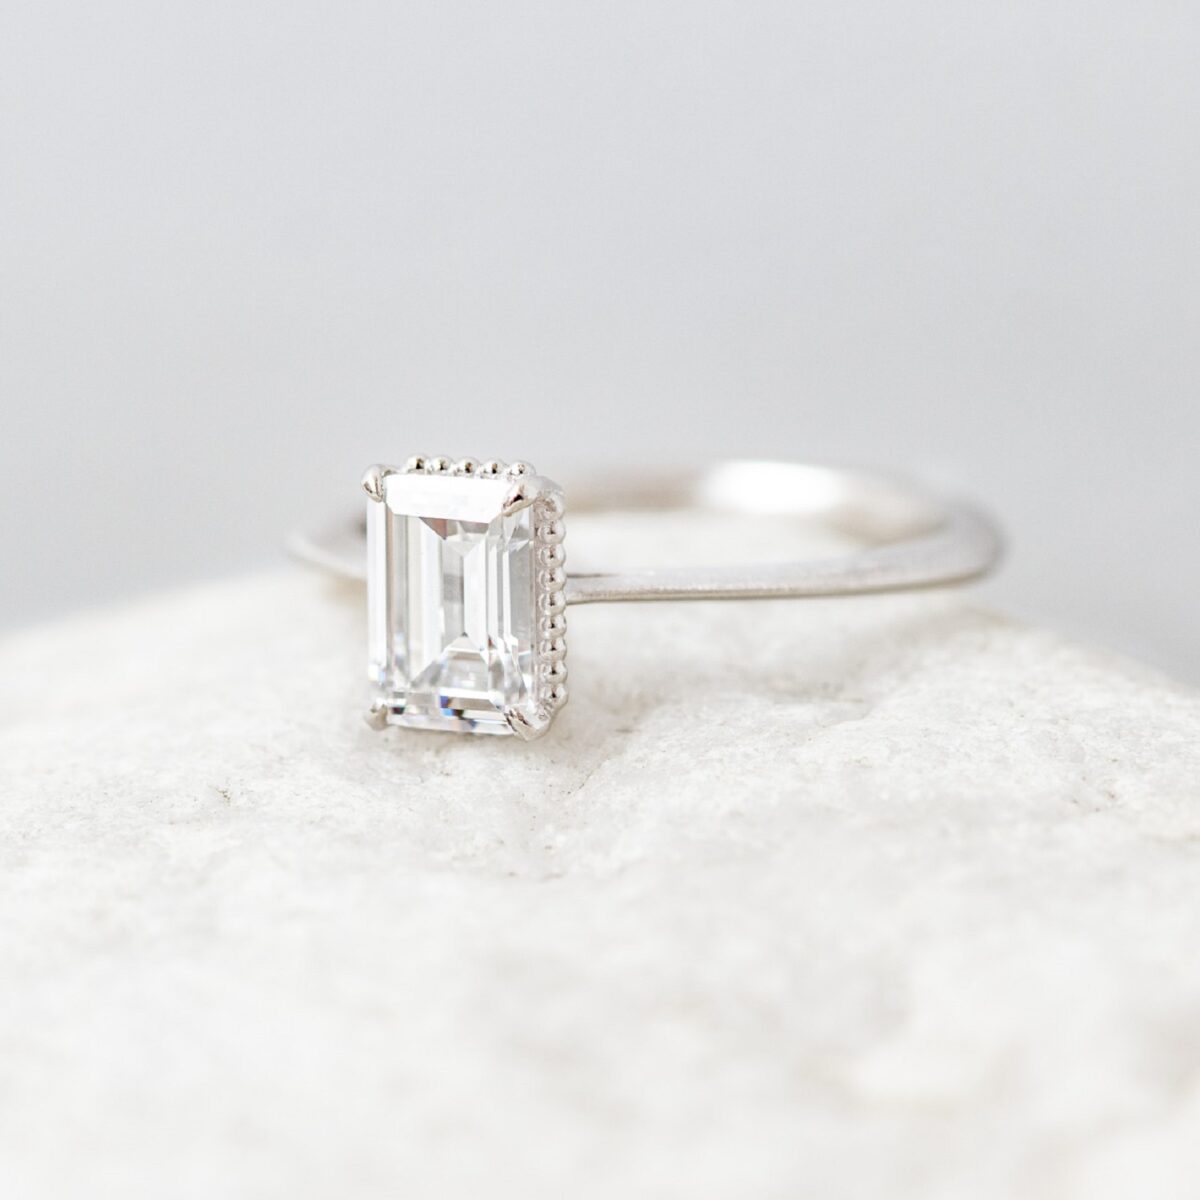 Unique hidden bead halo emerald cut solitaire ring crafted in 14k white gold.